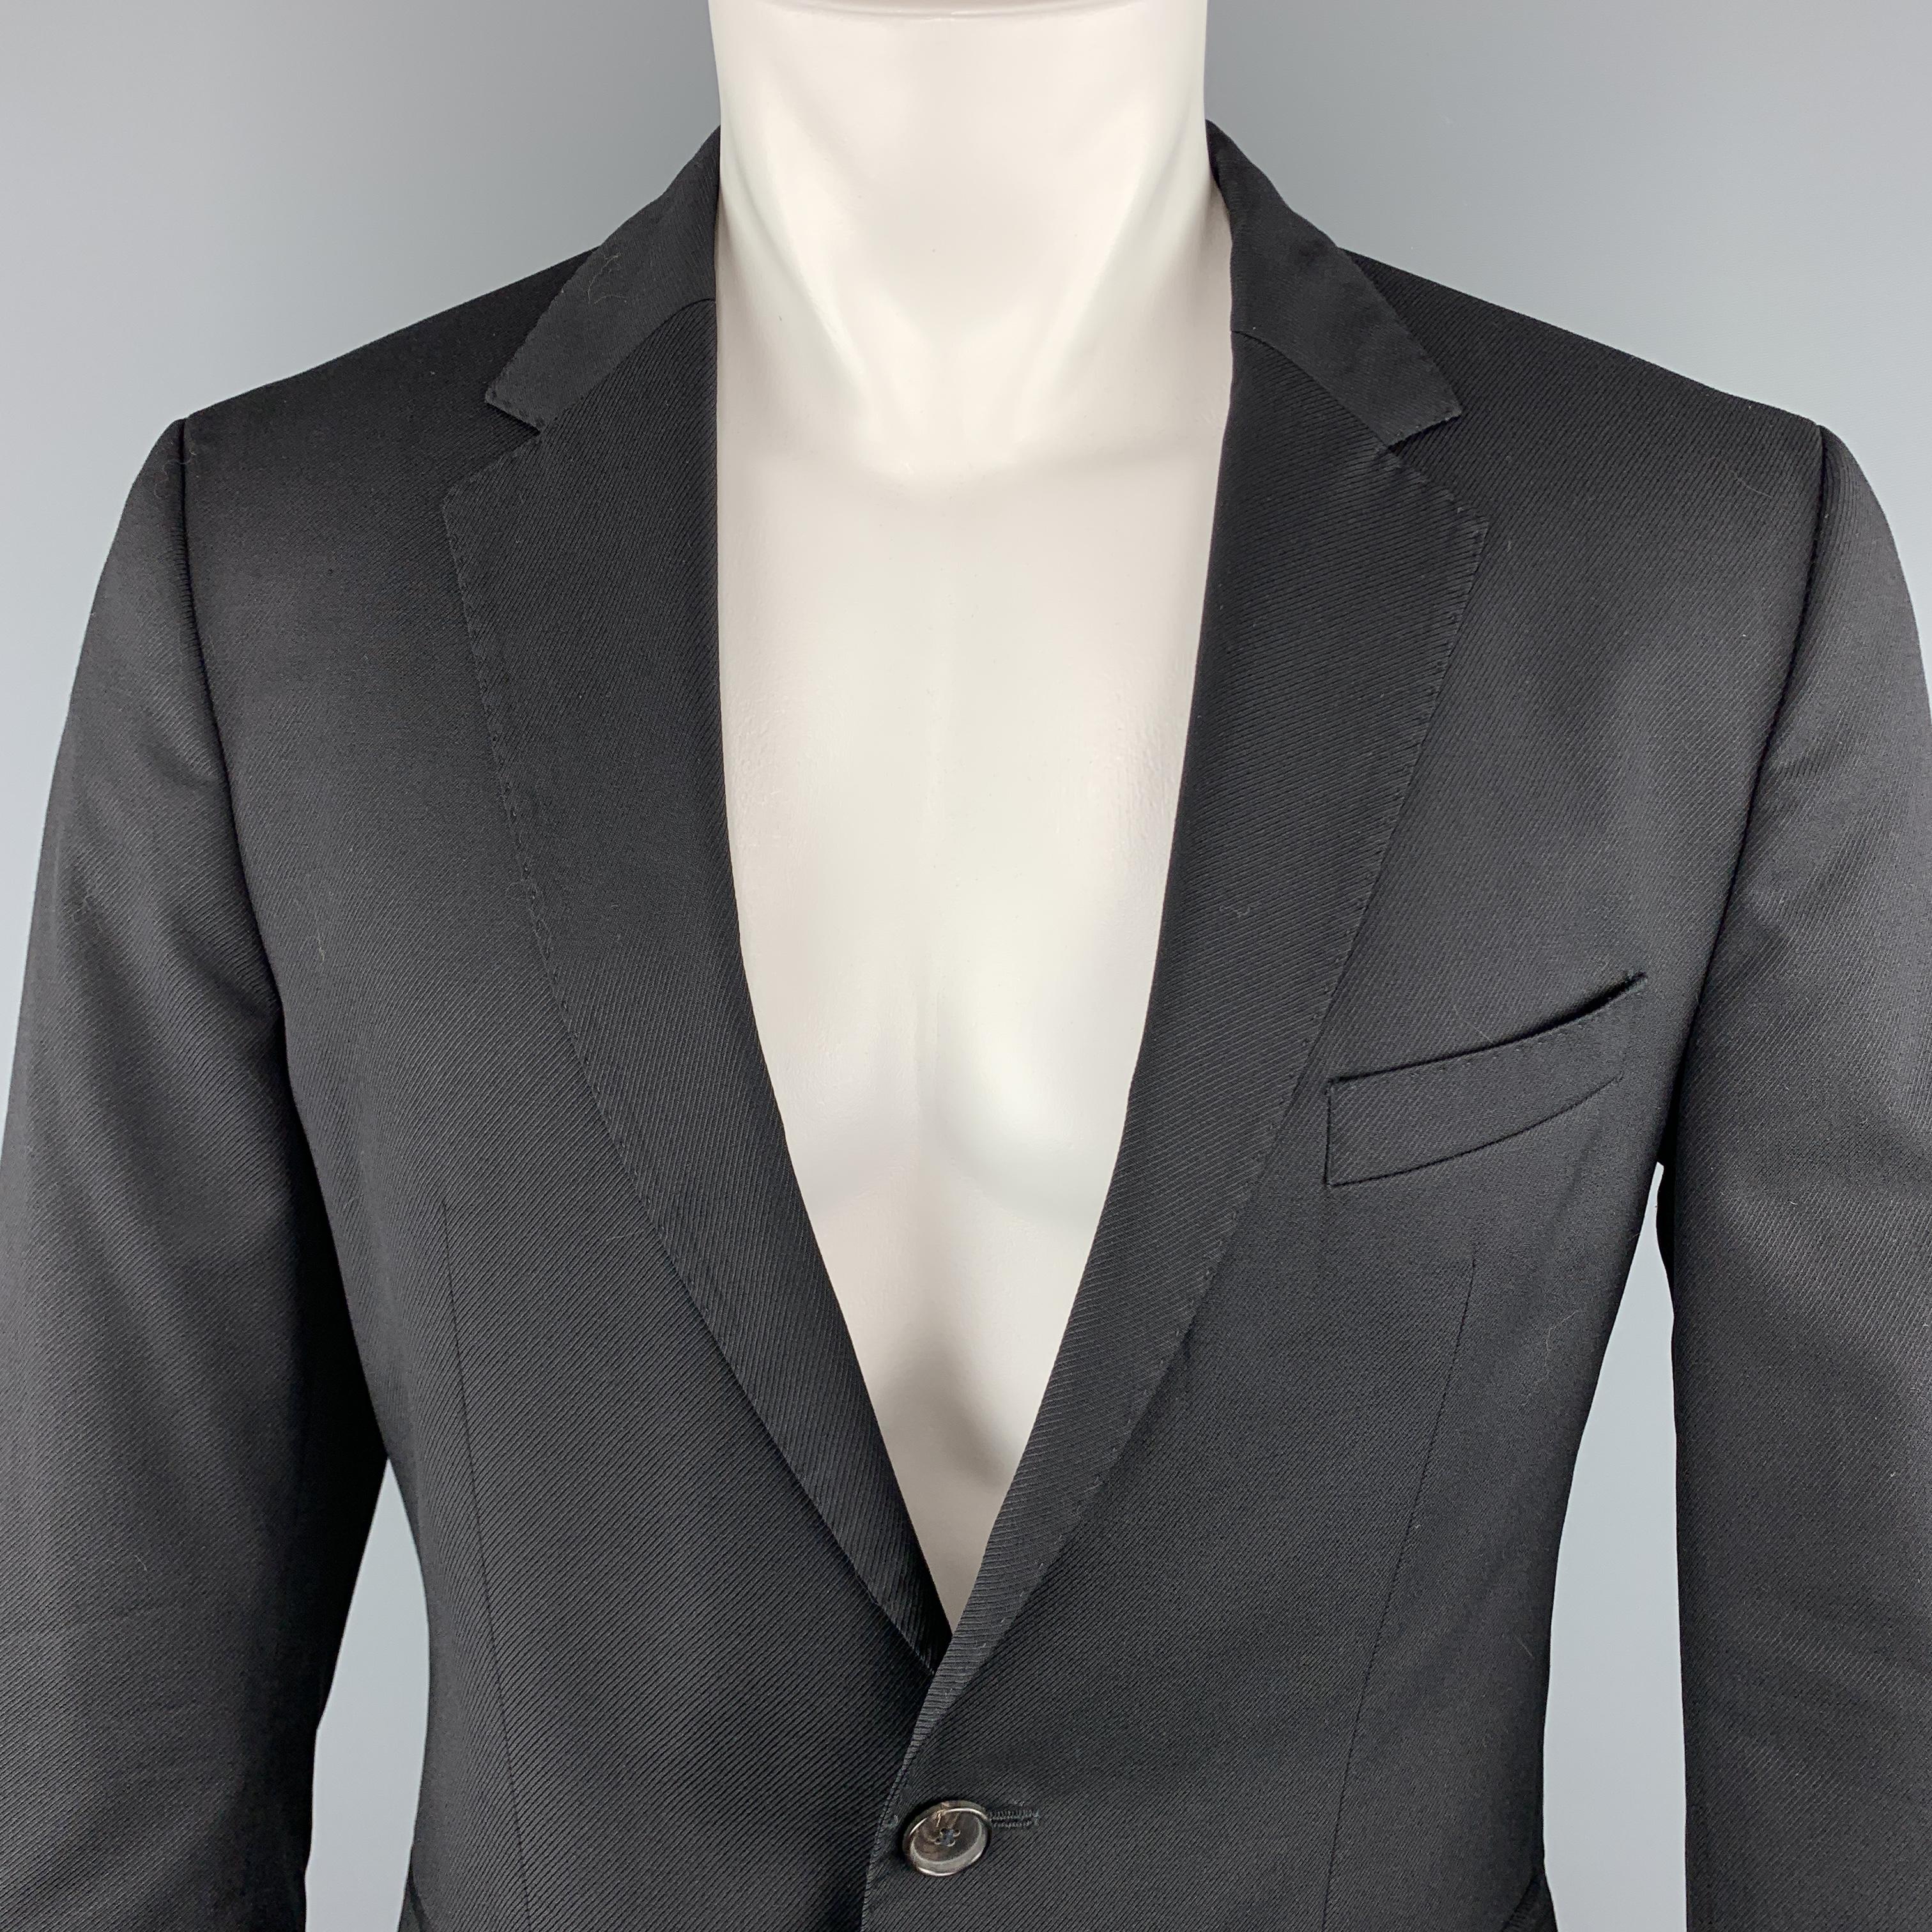 HUGO BOSS Sport Coat comes in a black tone in a striped texture wool material, with a notch lapel, slit and flap pockets, two buttons at closure, single breasted, a double vent at back, and buttoned cuffs. 

Excellent Pre-Owned Condition.
Marked: